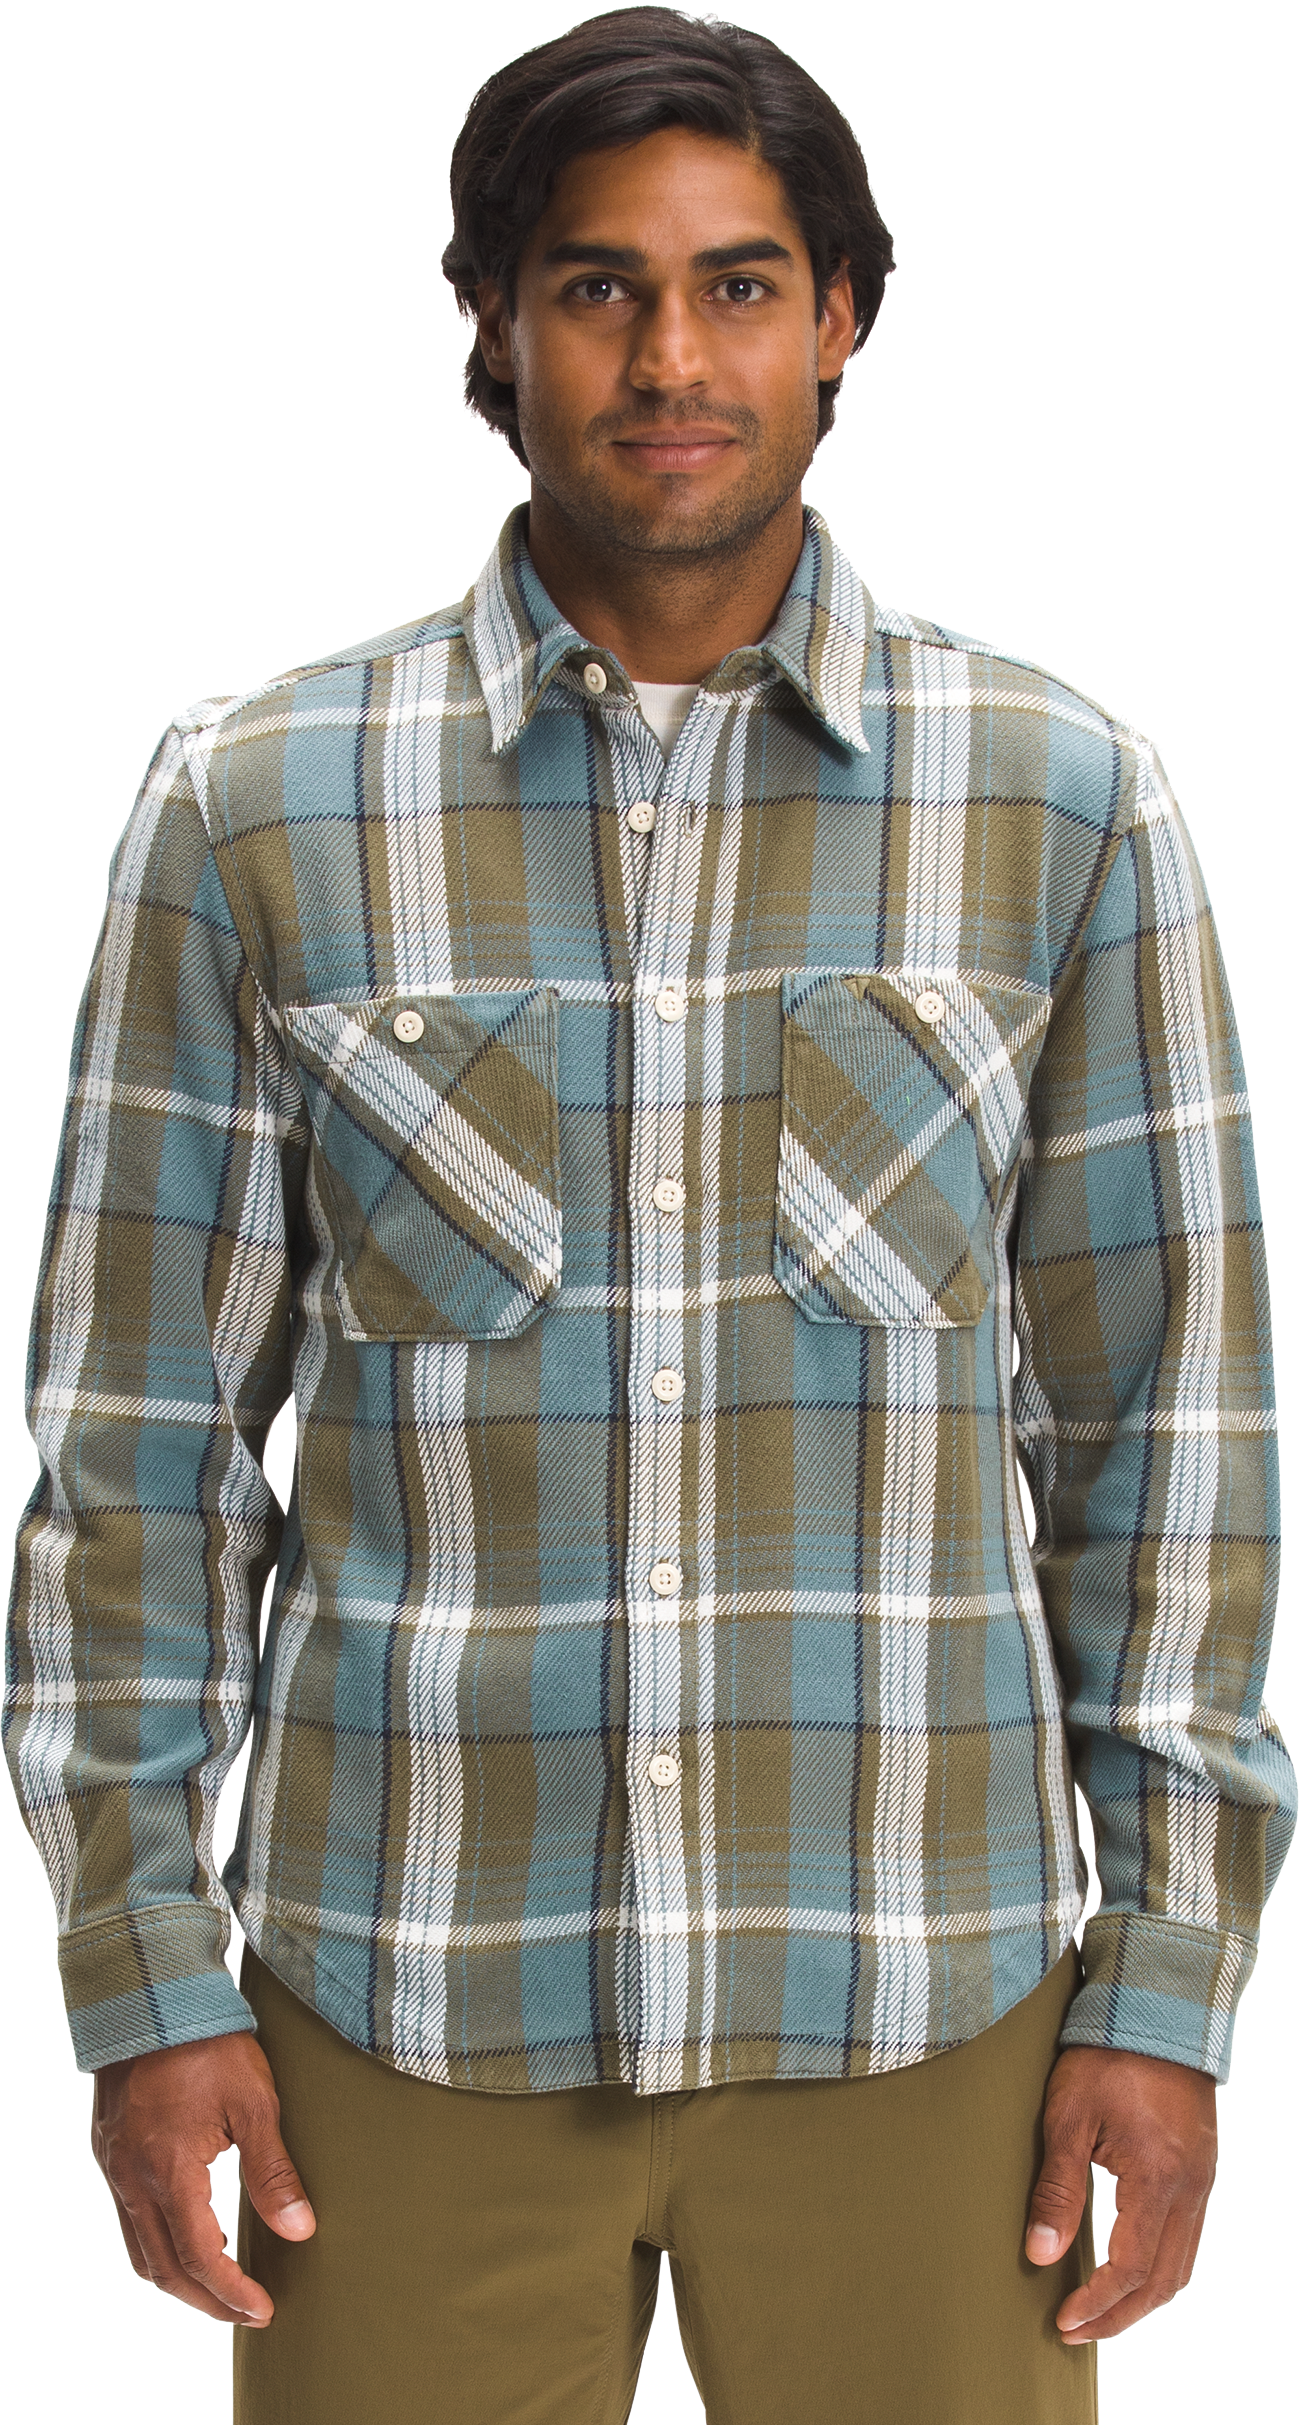 The North Face Valley Twill Flannel Long-Sleeve Shirt for Men - Goblin Blue Large HD Plaid - L